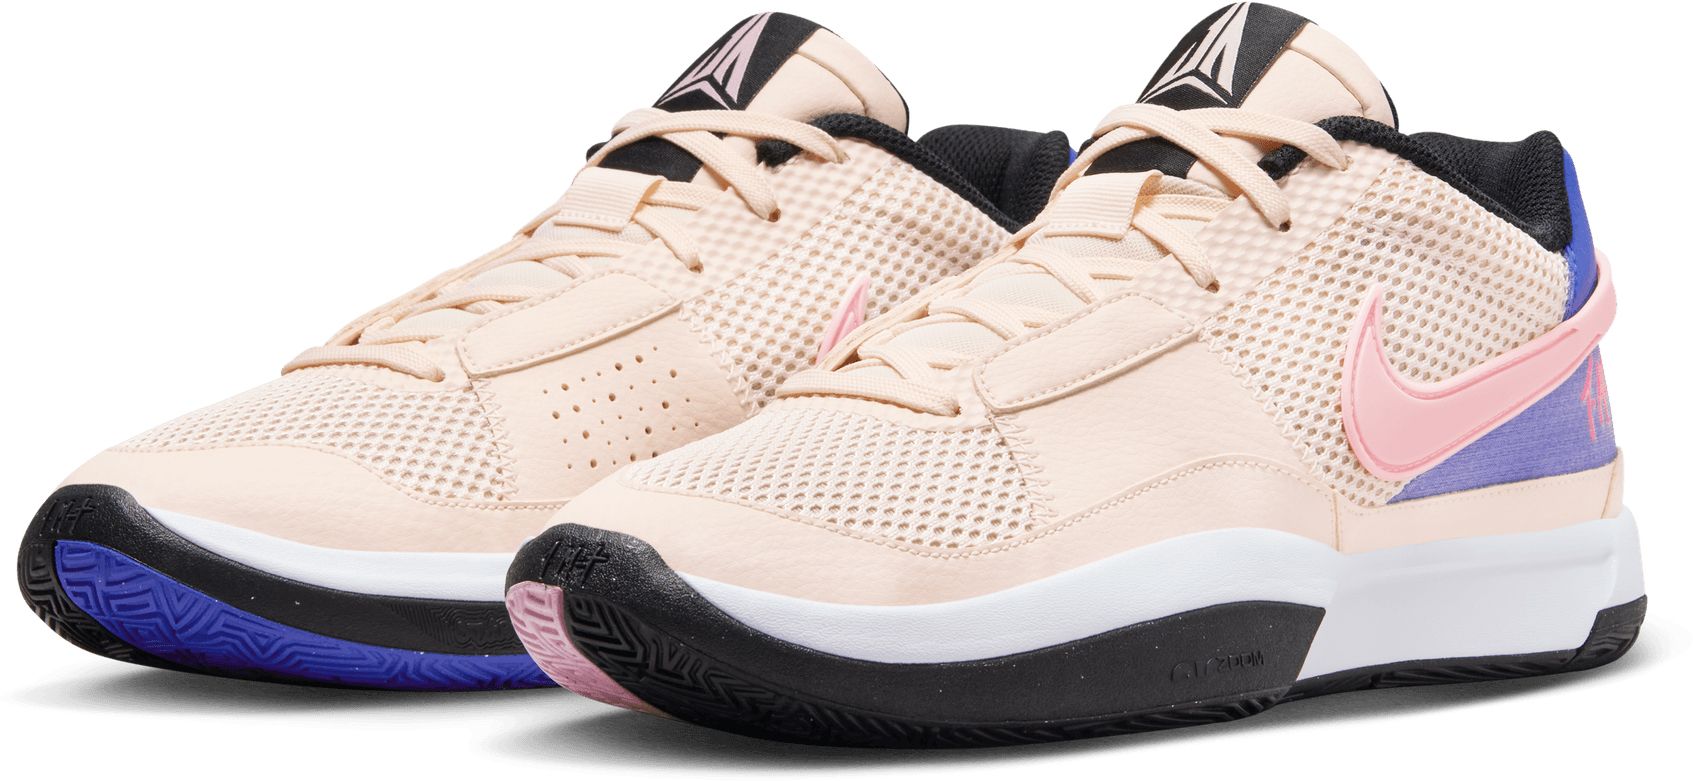 Nike Ja 1 'Guava Ice' Basketball Shoes | DICK'S Sporting Goods